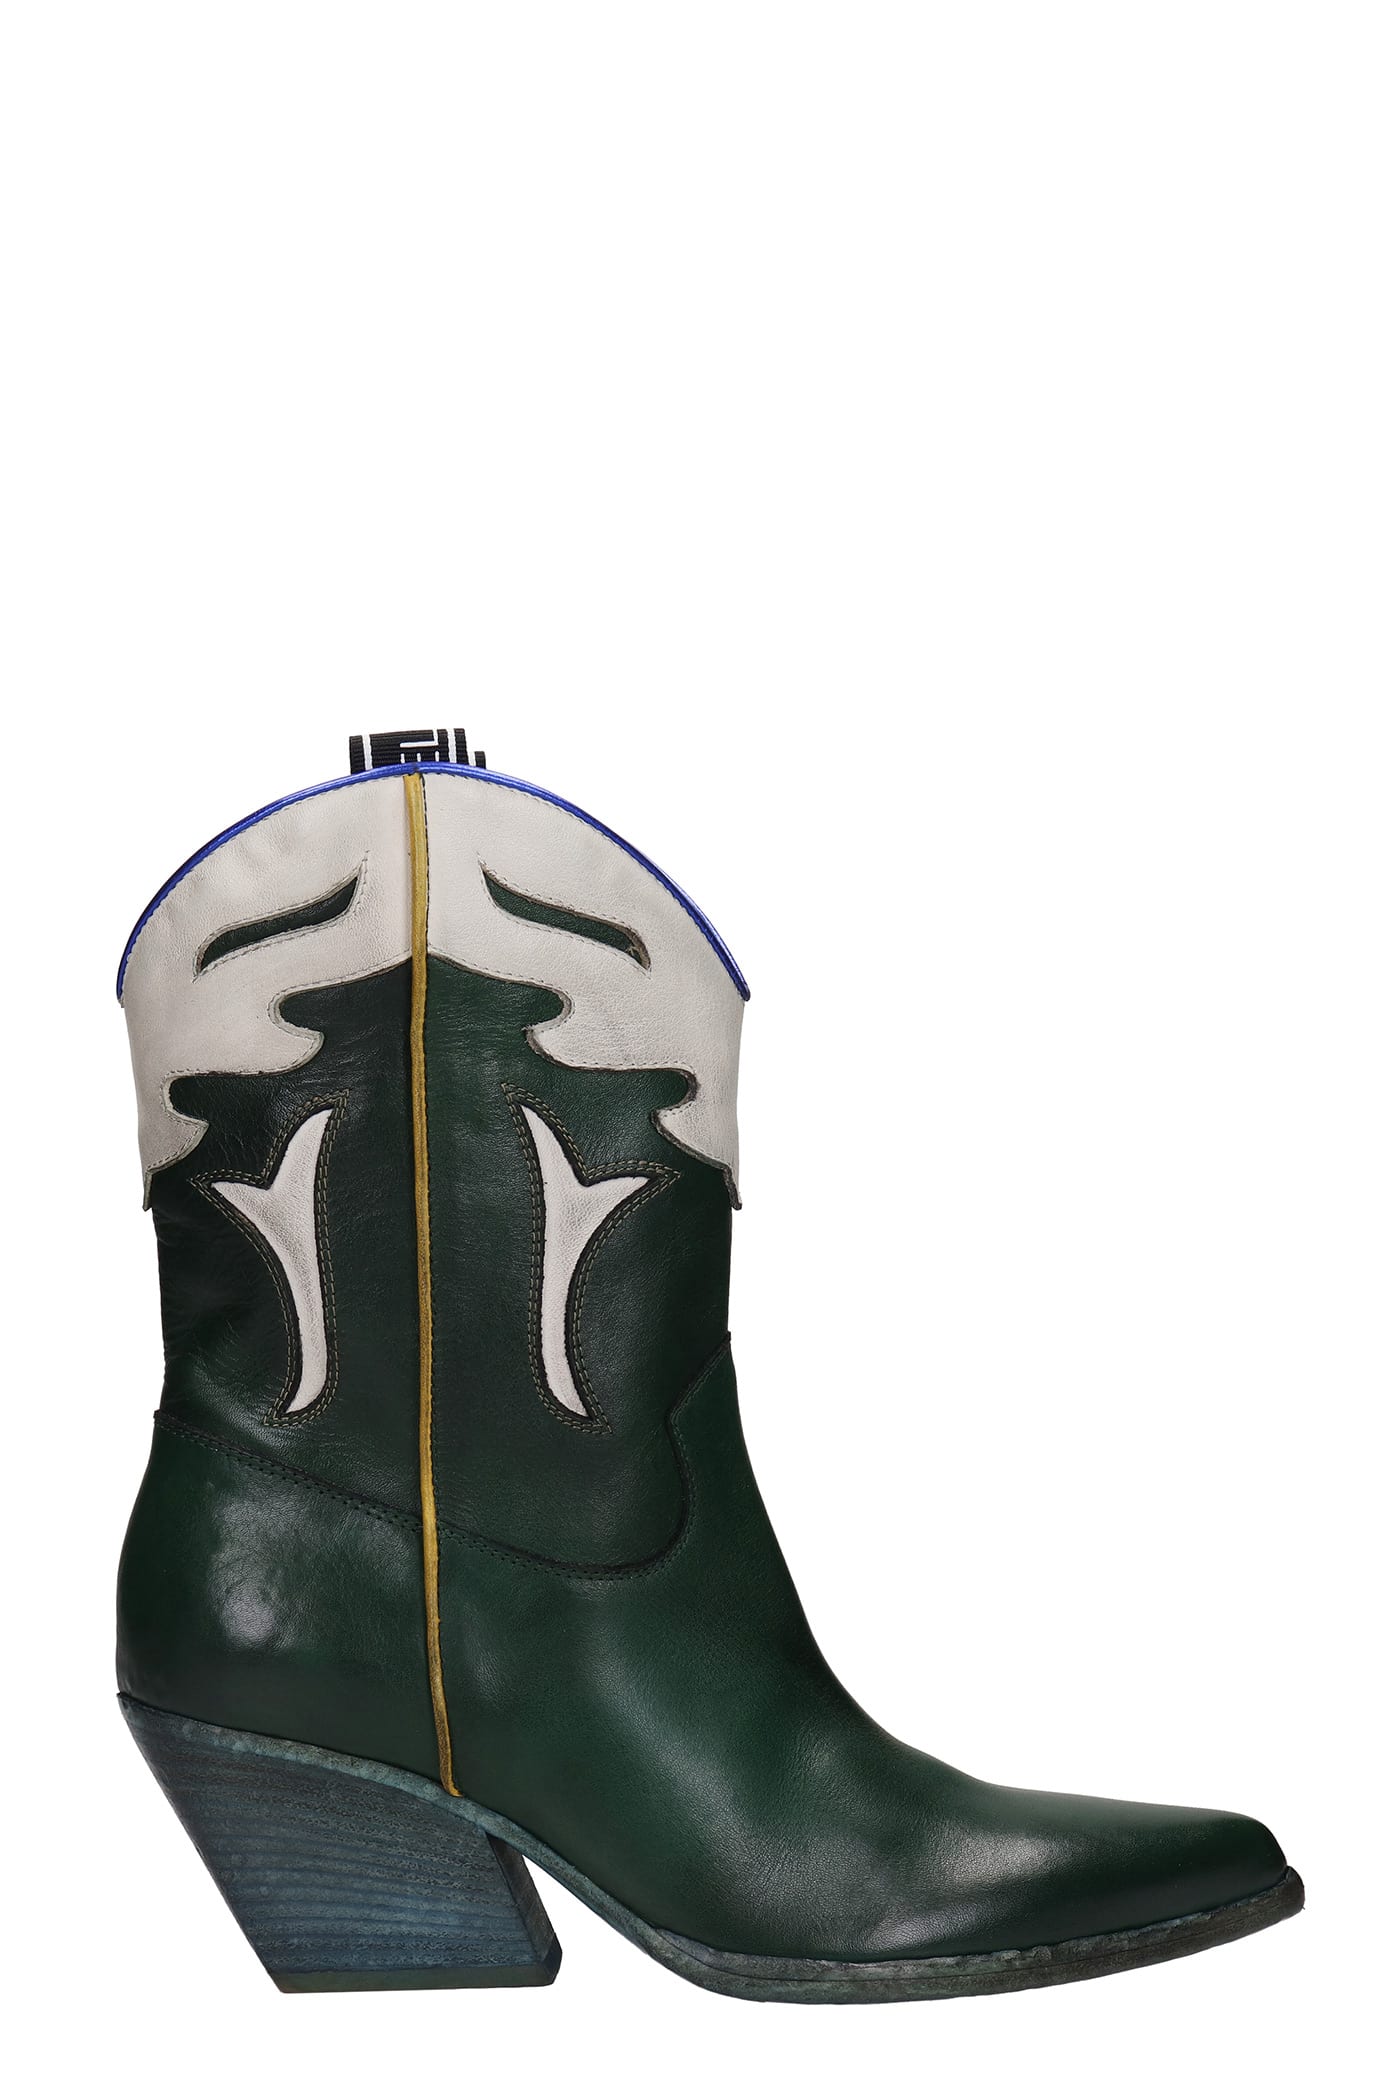 Elena Iachi Texan Ankle Boots In Green Leather